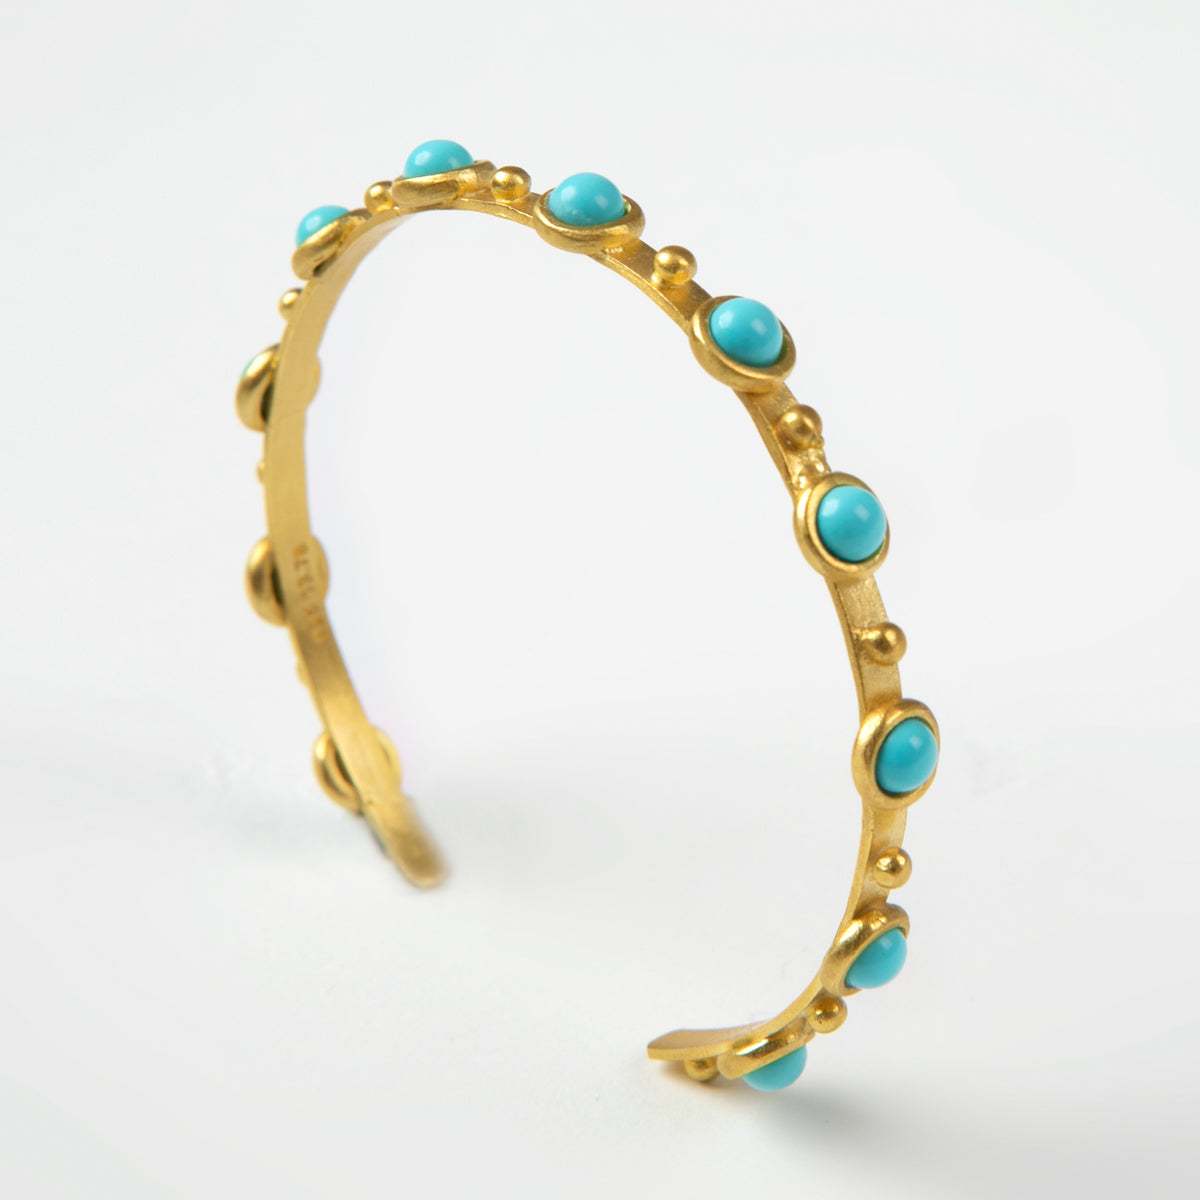 Dorothea Turquoise bracelet silver 925° gold plated 22k by Pearl Martini